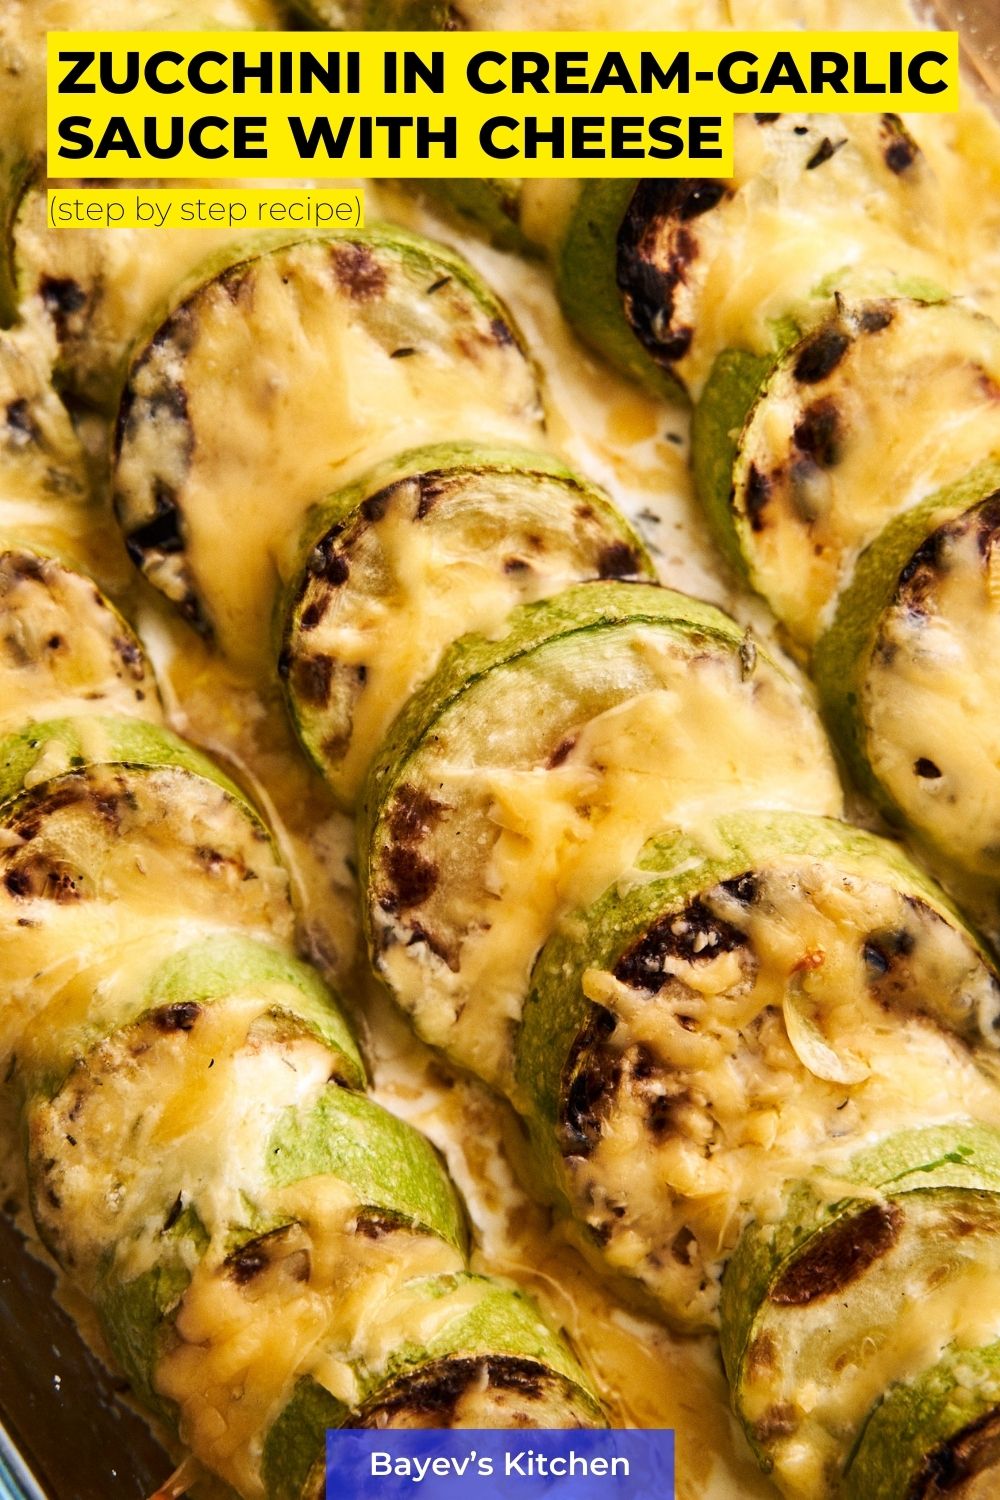 More often than not, zucchini recipes are quick, easy and budget-friendly. Zucchini in cream sauce is no exception. Yes, the cost of heavy cream can bite a bit. But it is worth it, but to save and take less fat - I do not recommend it, they will separate in the process of baking and the sauce will be ruined.
Thanks to its neutral flavor, zucchini reveals new notes every time, depending on the ingredients used and variations in preparation. We will use a win-win combination of zucchini and garlic. Cream and cheese will give sweetness and saltiness, respectively, and thyme will add interesting accents to the flavor.